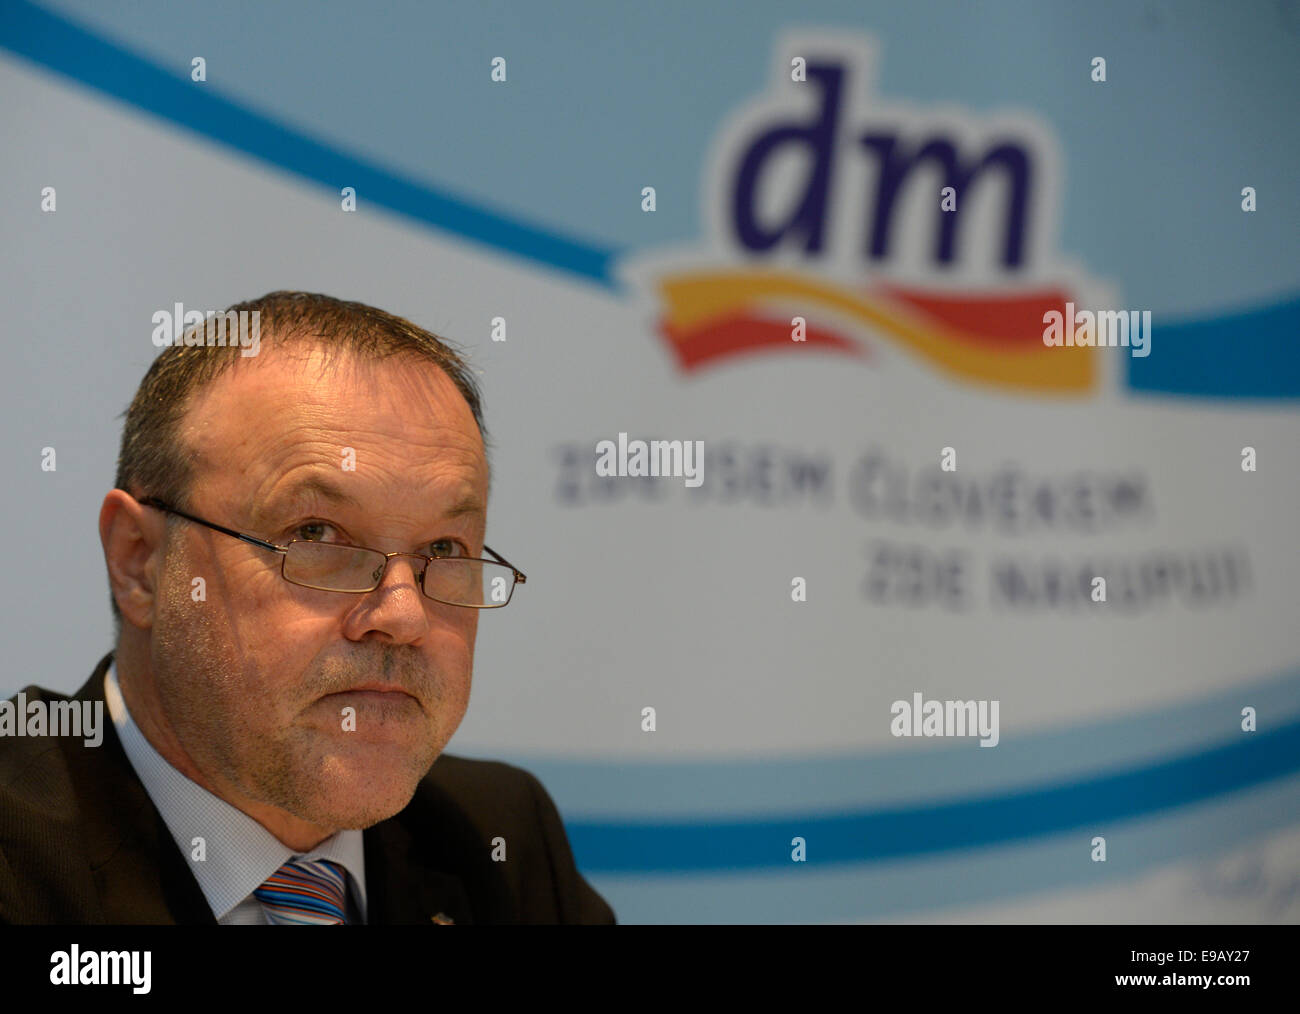 Chemist's chain dm drogerie markt raised its sales in the Czech republic by 4.6 percent to Kc6.81bn in the financial year 2013/2014, the company said at a press conference today, on Thursday, October 23, 2014 in Prague, Czech Republic, without disclosing the size of its profit. dm drogerie markt is a subsidiary of dm drogerie markt GmbH Austria. It opened its first Czech shop in Ceske Budejovice, south Bohemia, in 1993. The parent company, operating via its subsidiaries also in Hungary, Slovakia, Slovenia, Croatia, Serbia, Bosnia and Herzegovina, Romania, Bulgaria and Macedonia, increased its Stock Photo